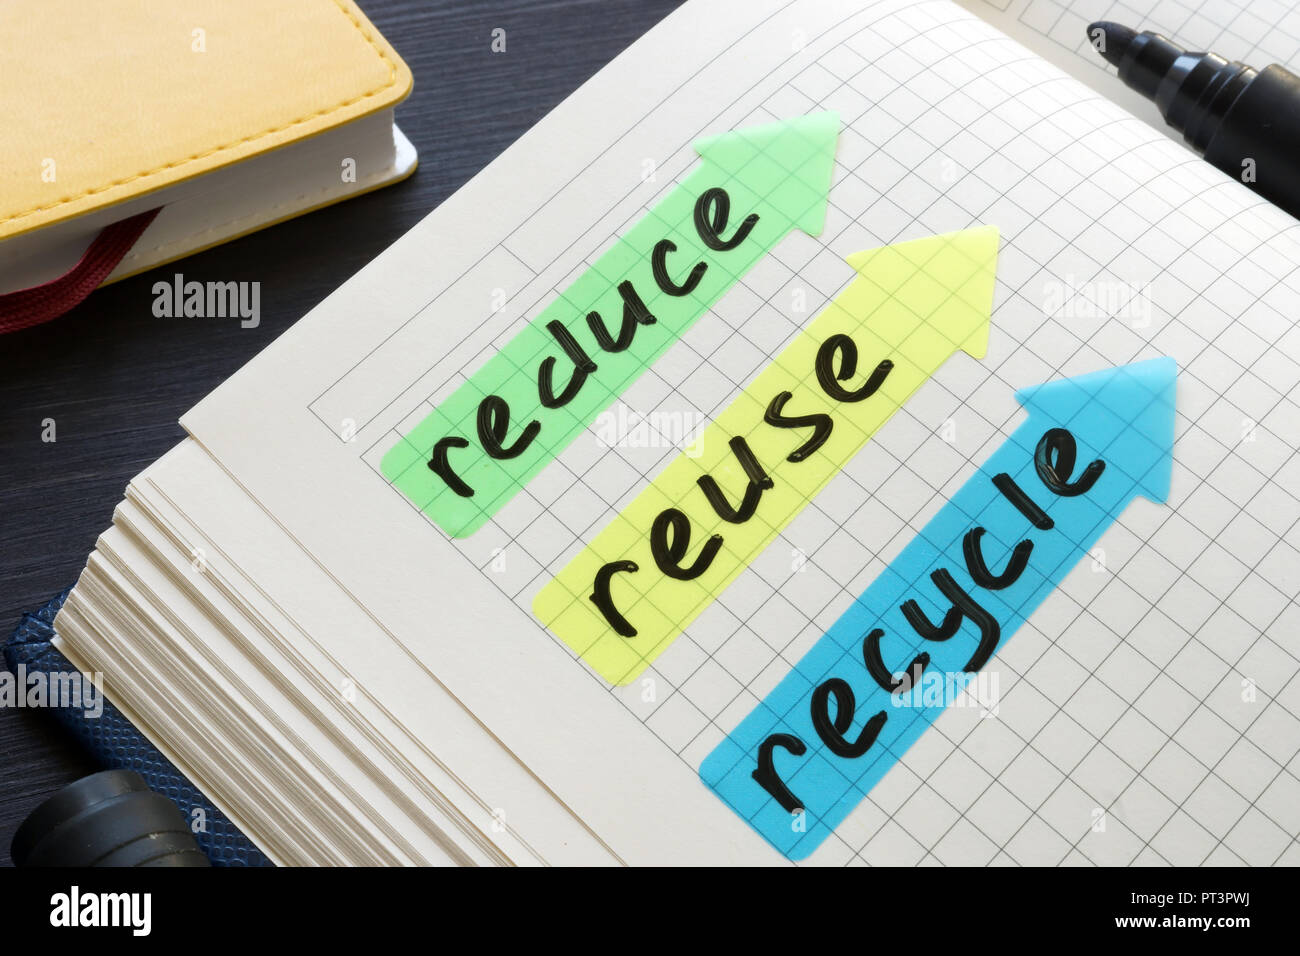 Reduce, reuse, recycle handwritten in a note pad. Stock Photo